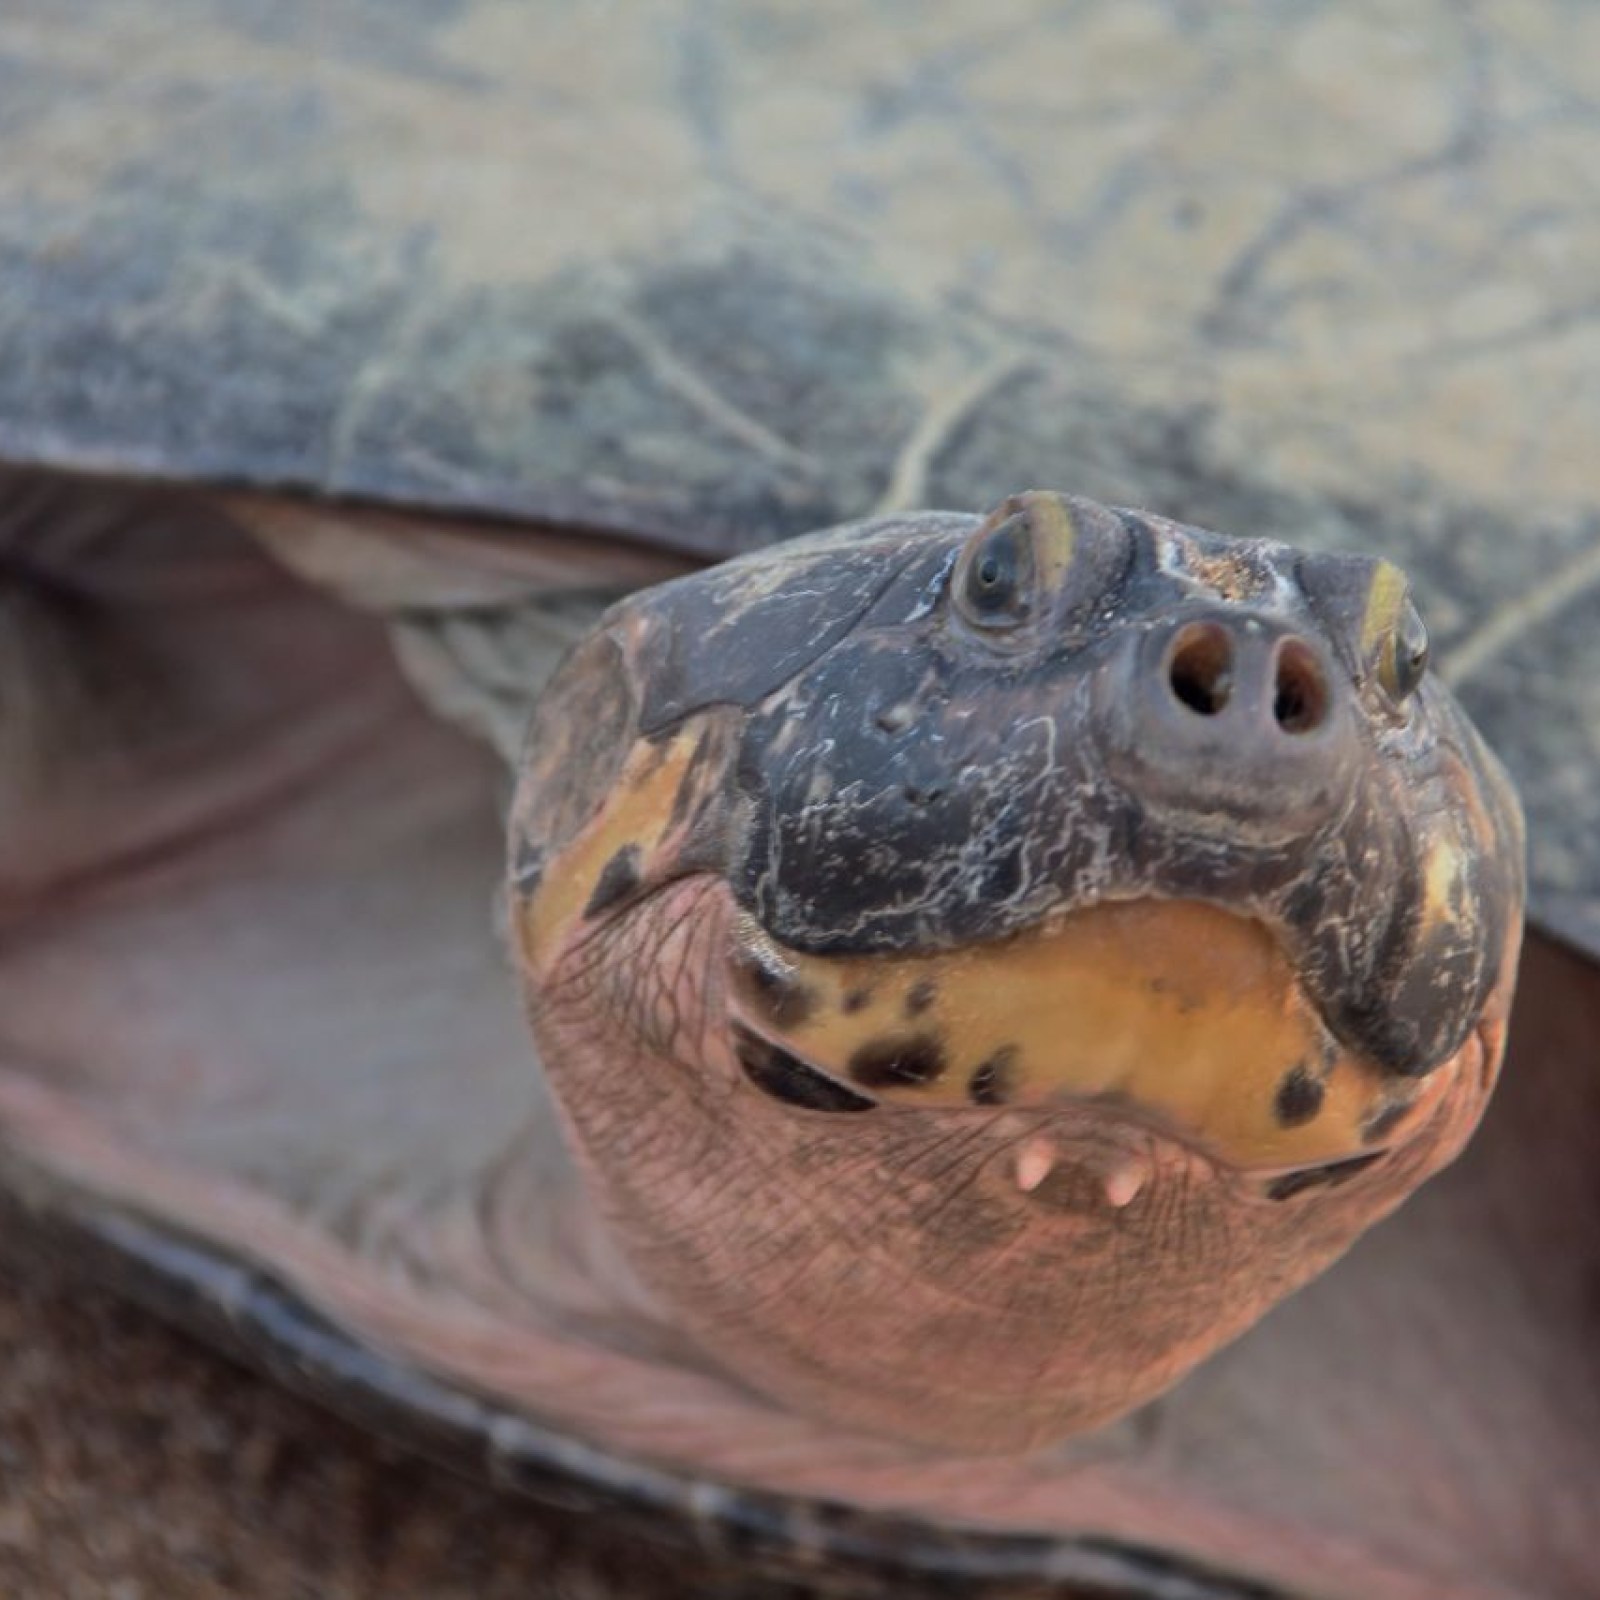 Turtles 'Talk' to Each Other, Parents Call Out to Offspring